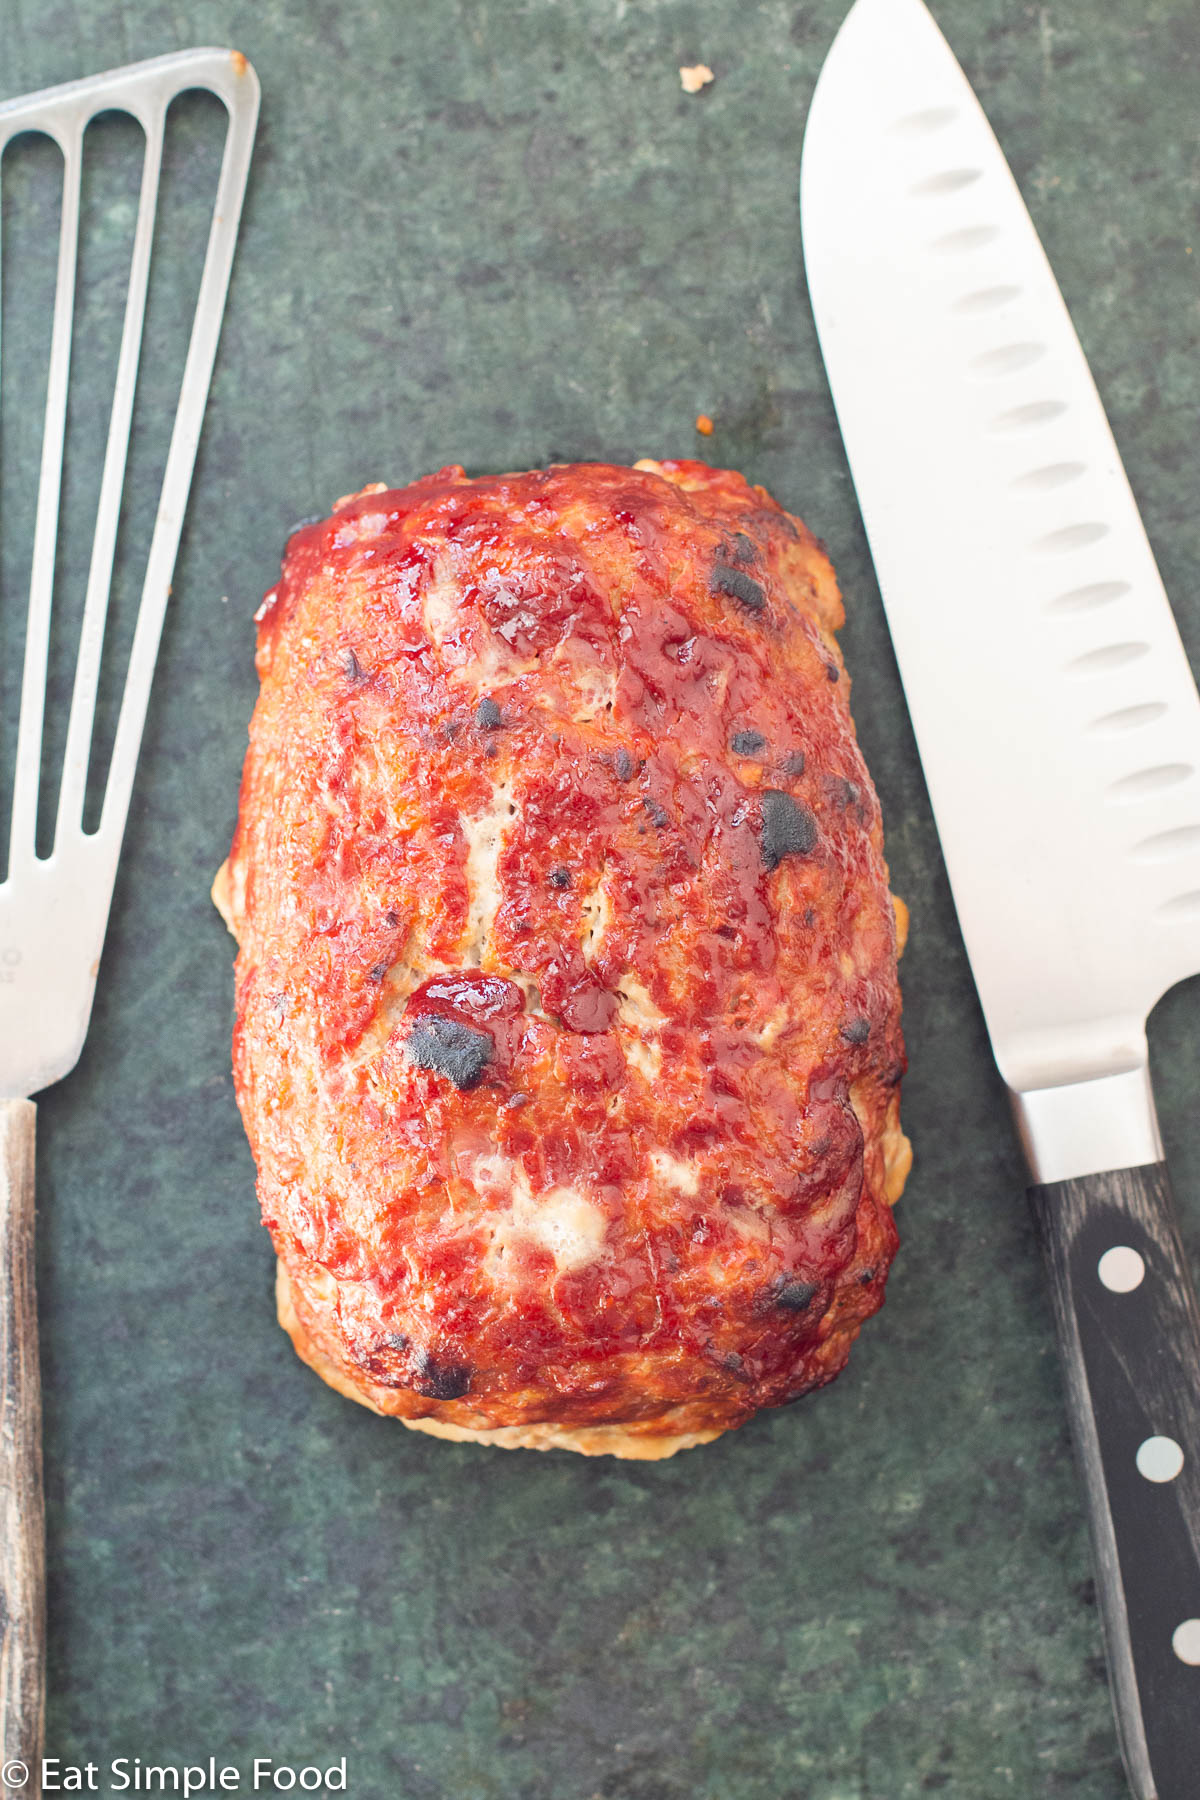 Top down view of turkey meatloaf with a brown red ketchup glaze. Knife and metal spatula on the side.